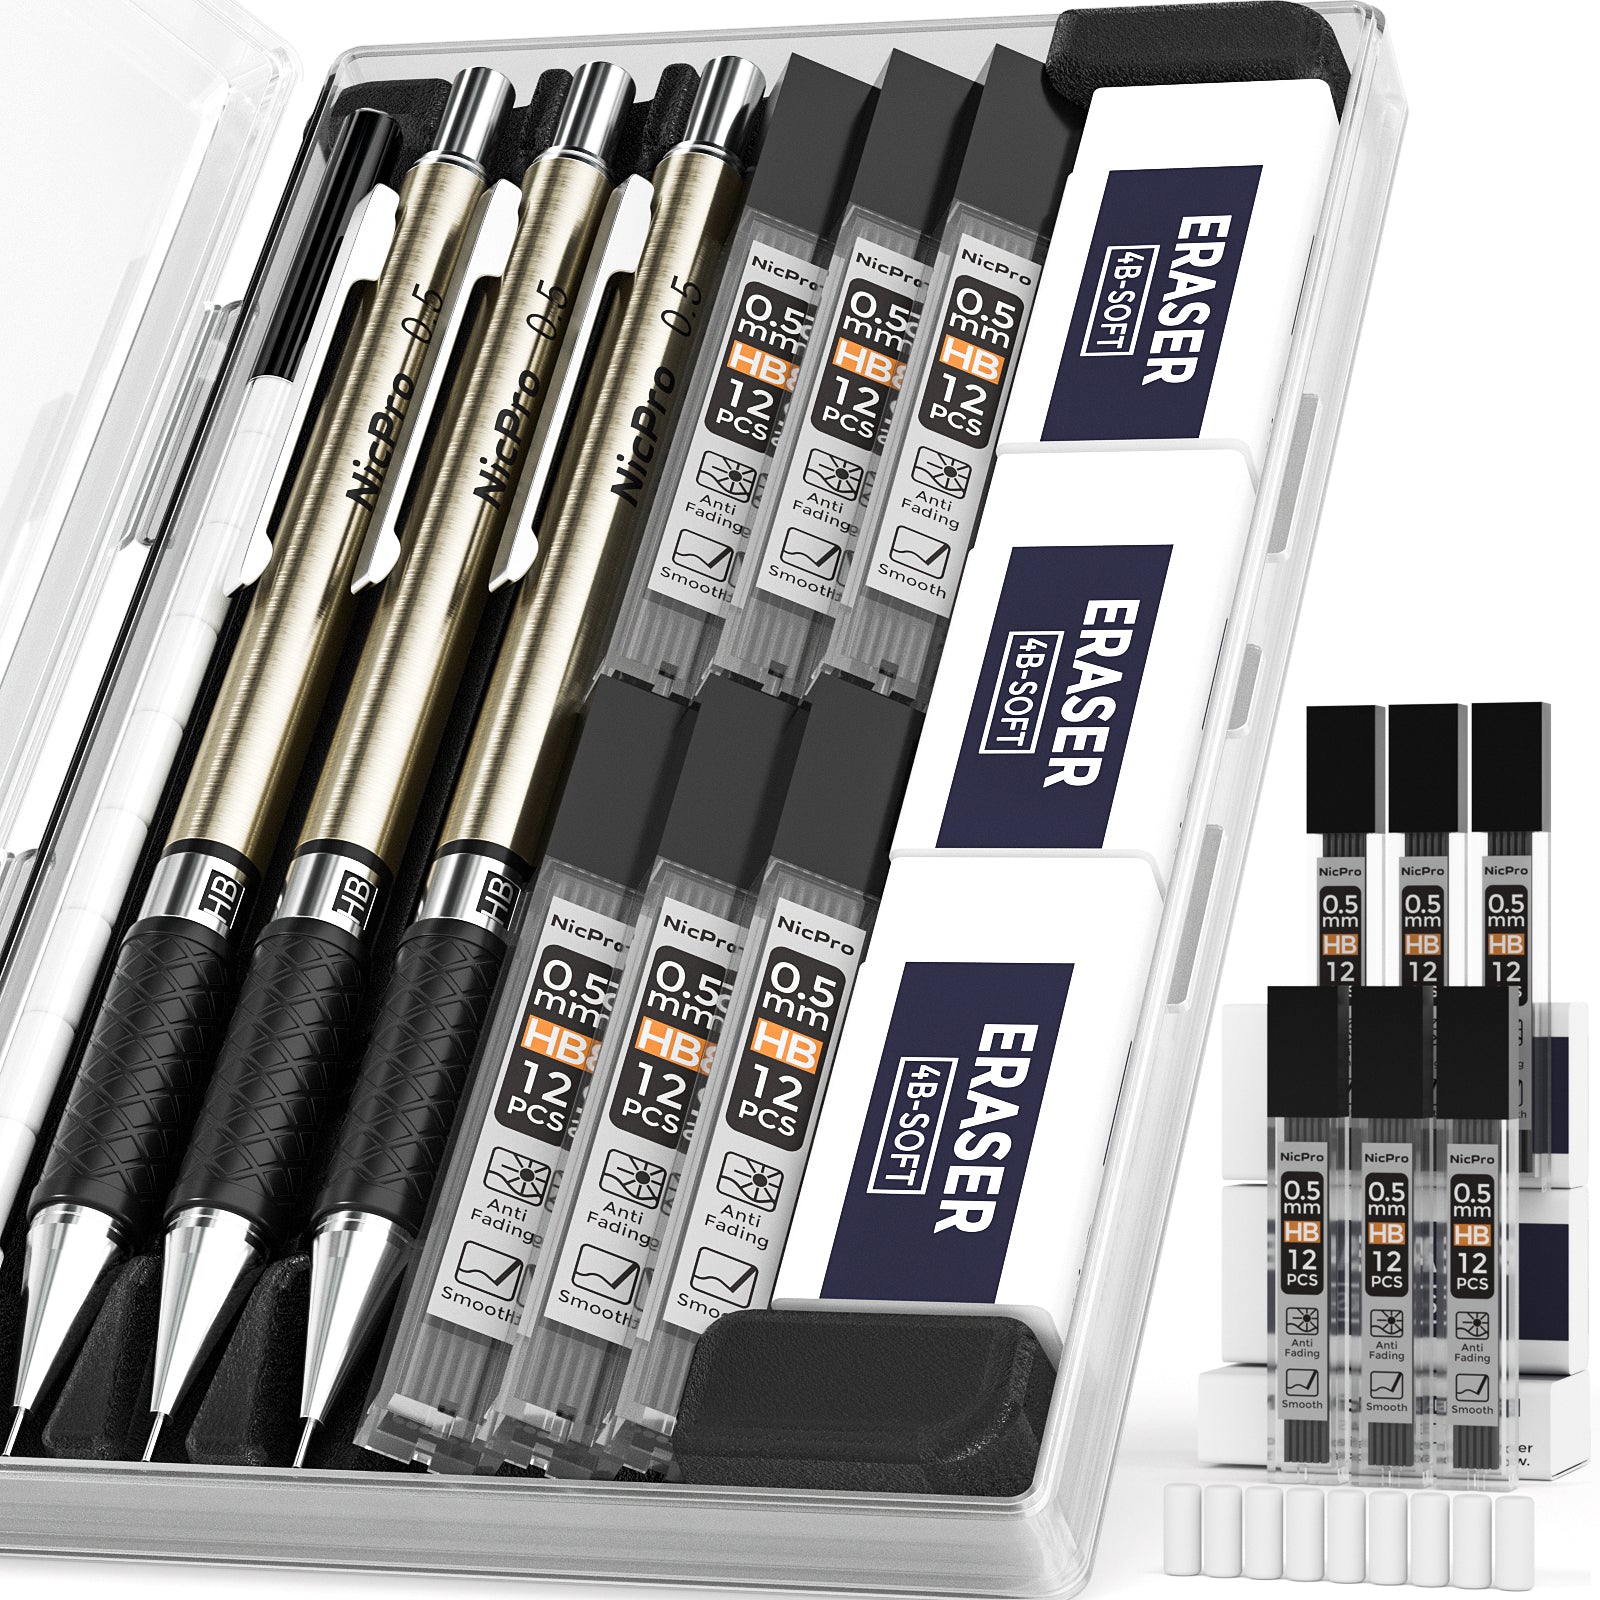 Nicpro 0.5 mm Art Mechanical Pencils Set in Storage Case, 3 PCS Metal Drafting Pencil Lead Pencil with 6 Tube HB Lead Refills, 3 Erasers, 9 PCS Eraser Refills for Artist Writing, Drawing, Sketching